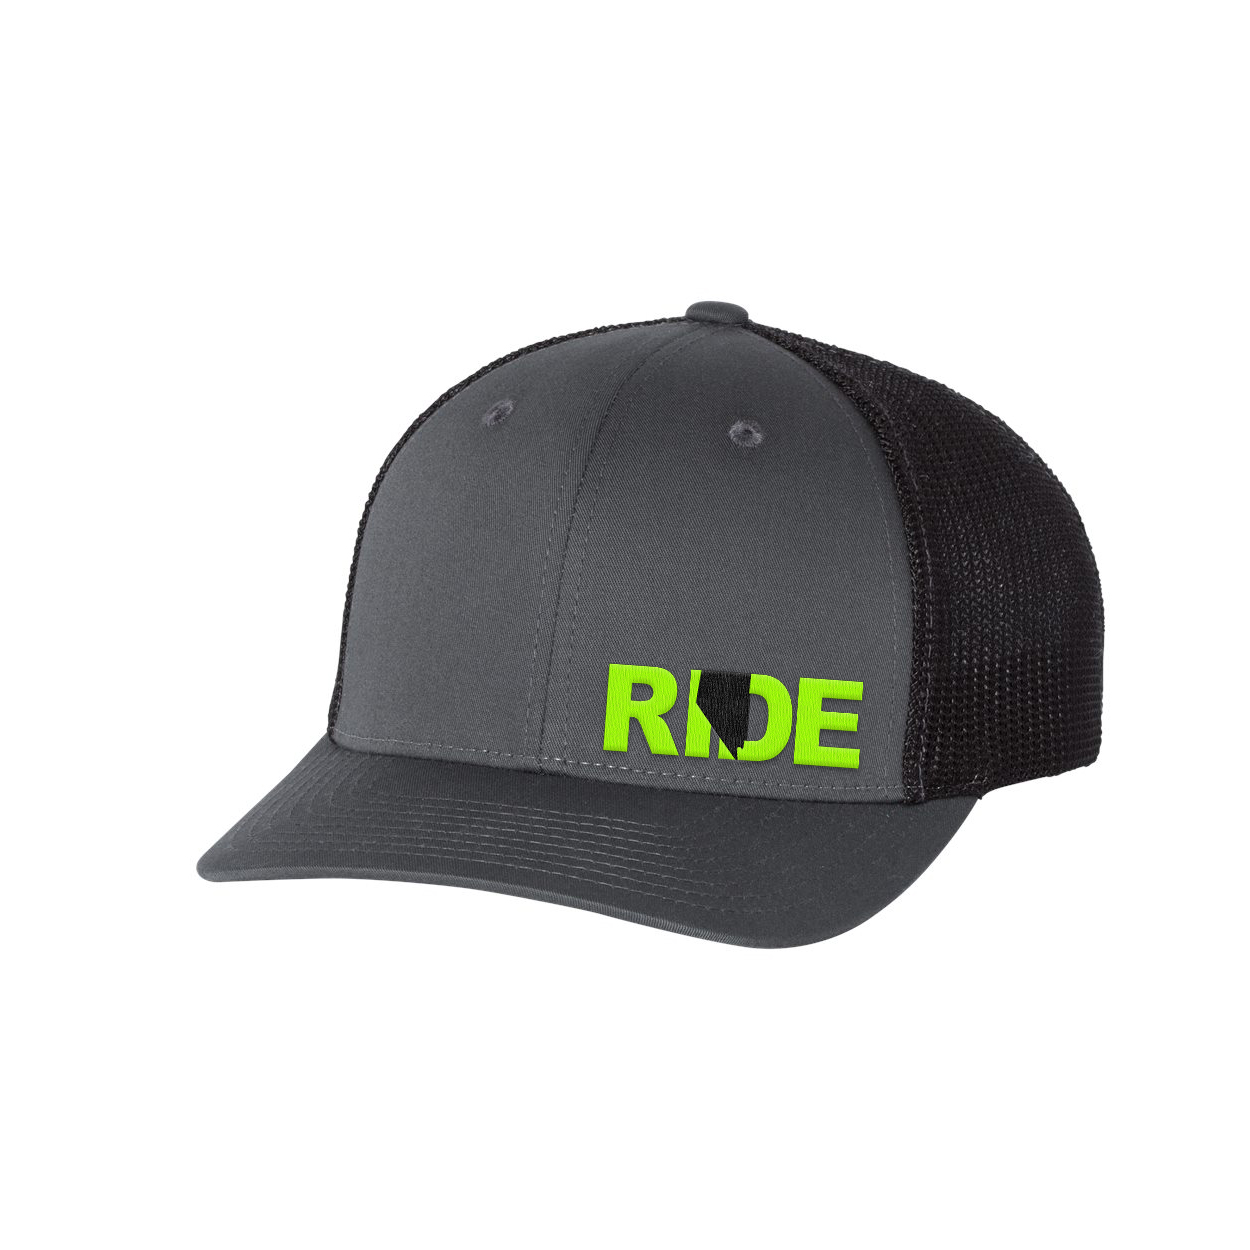 Ride Nevada Night Out Embroidered Snapback Trucker Hat Gray/Black/Hi-Vis